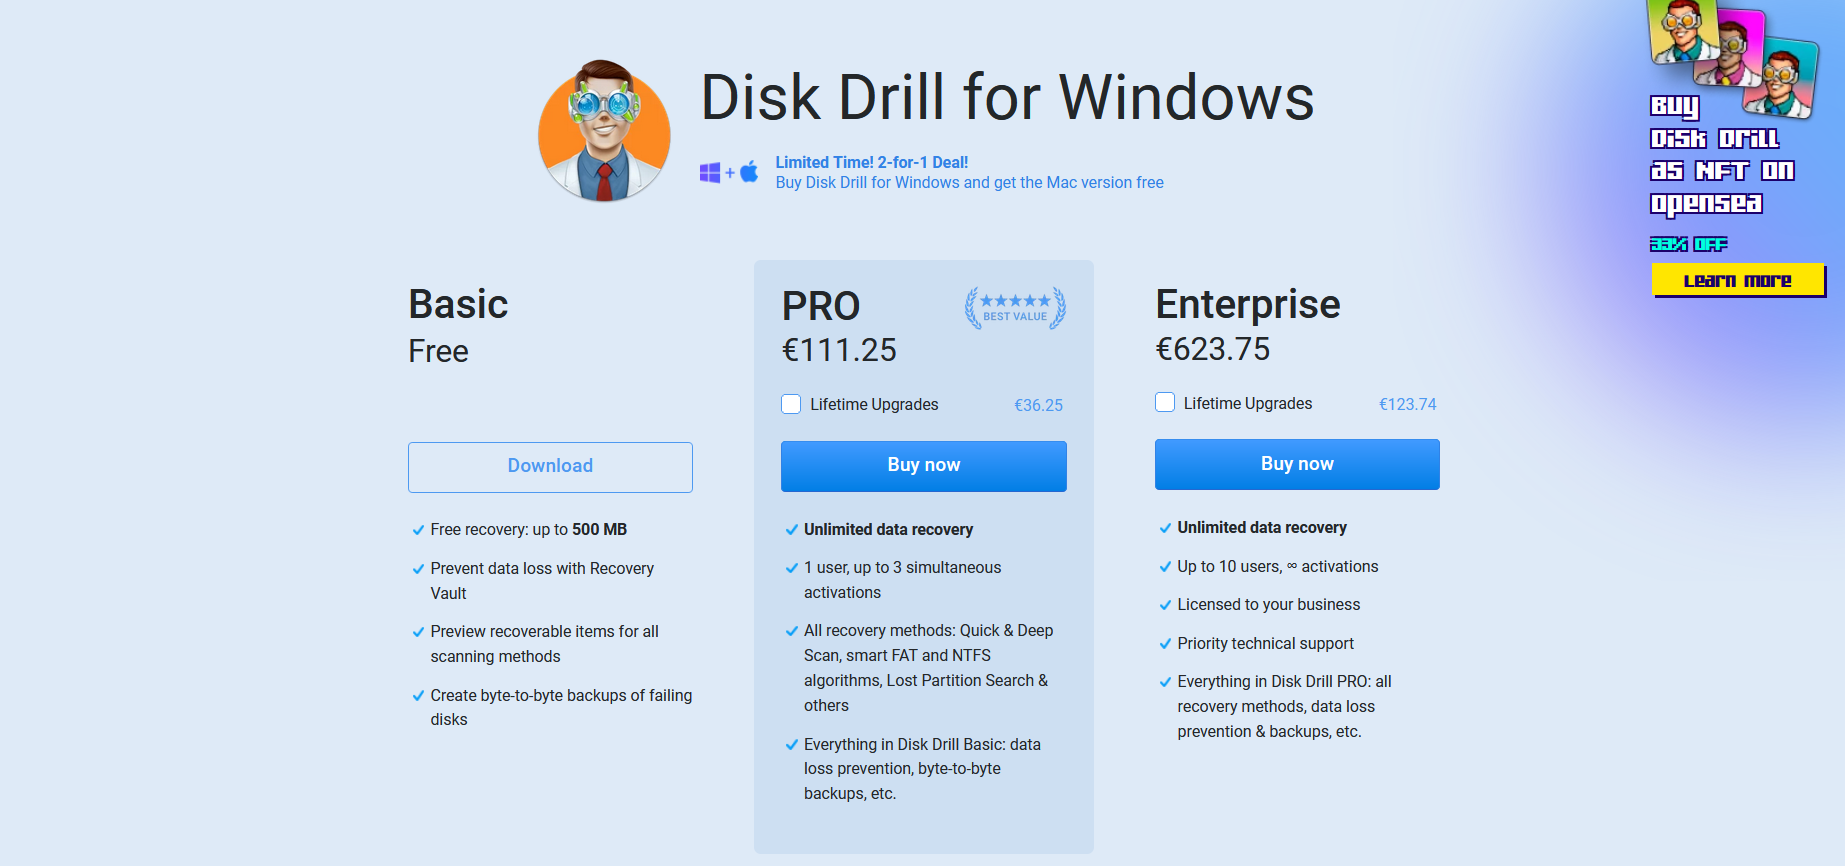 Disk Drill Pricing